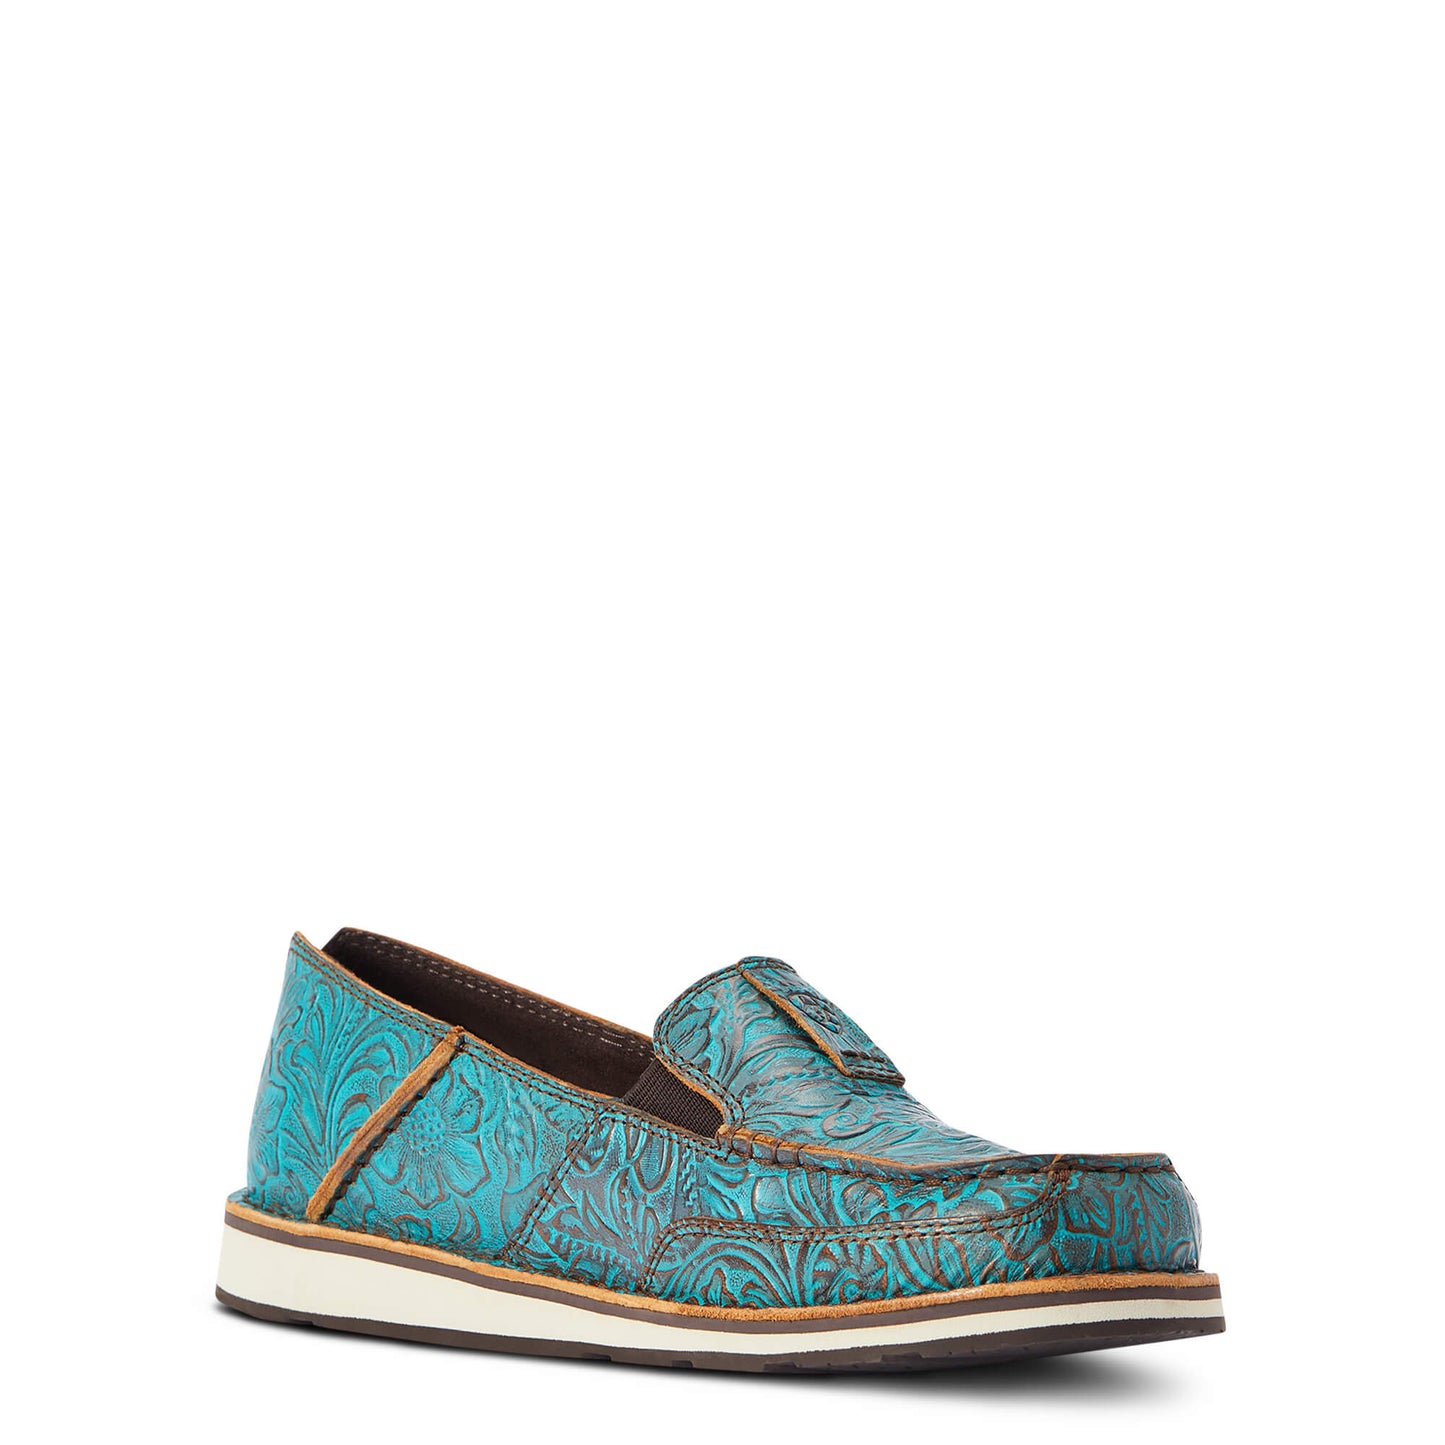 Ariat Turquoise Floral Emboss Cruiser